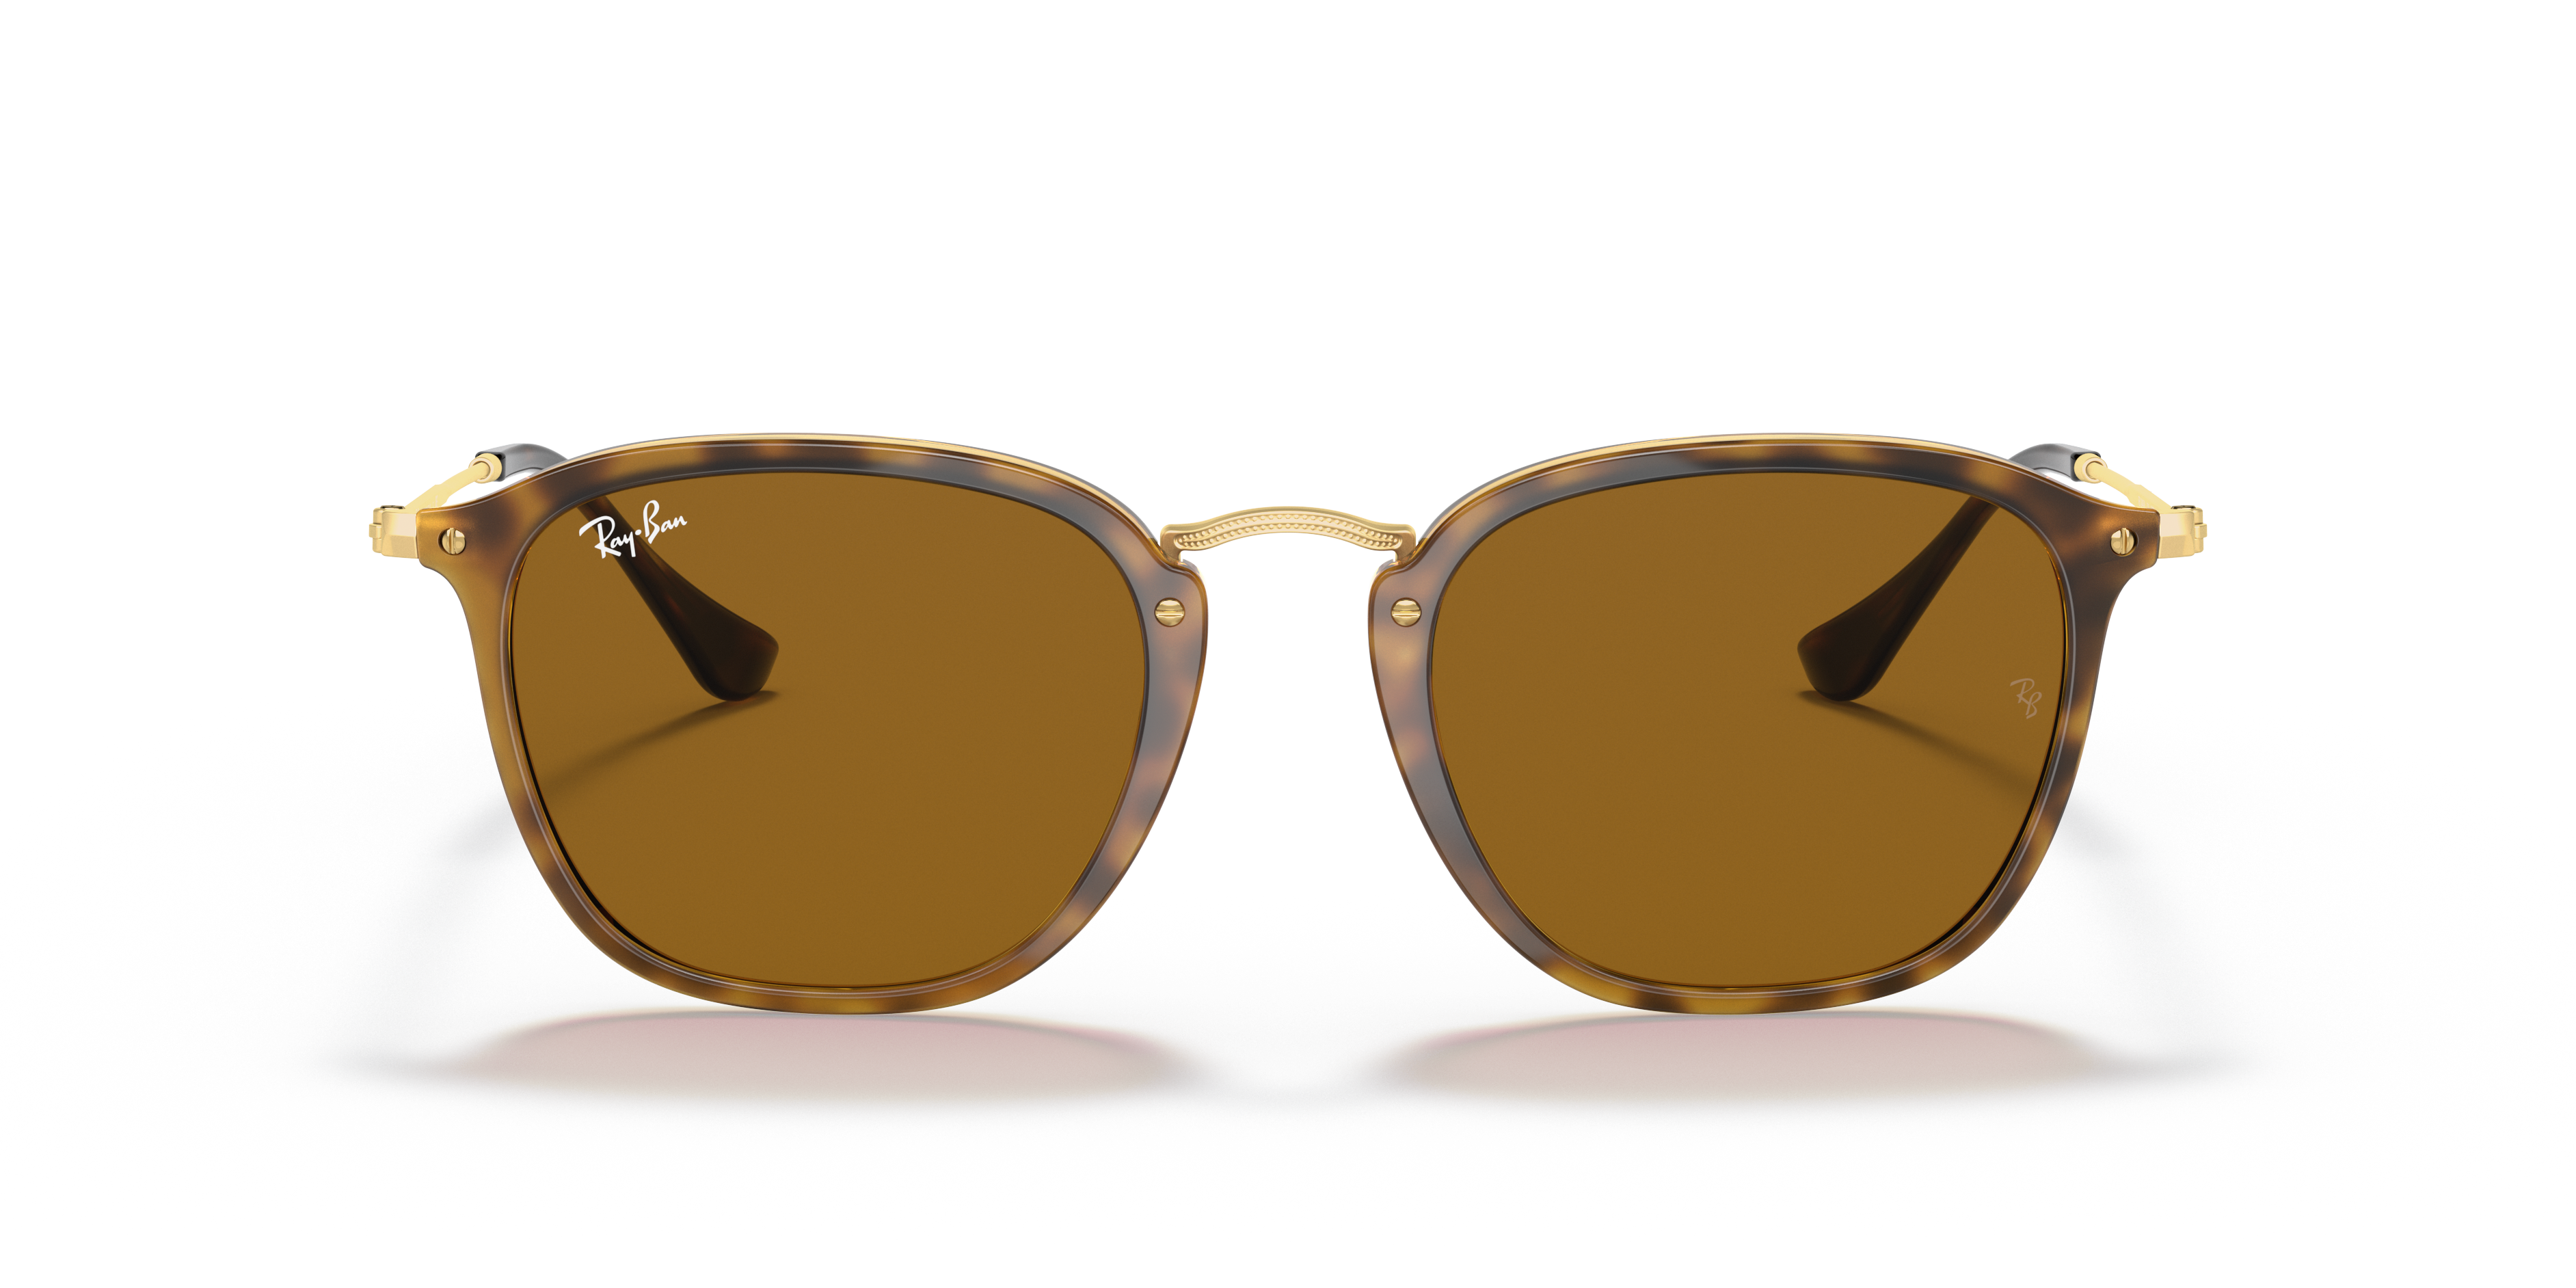 Rb2448n Sunglasses in Light Havana and Brown | Ray-Ban®